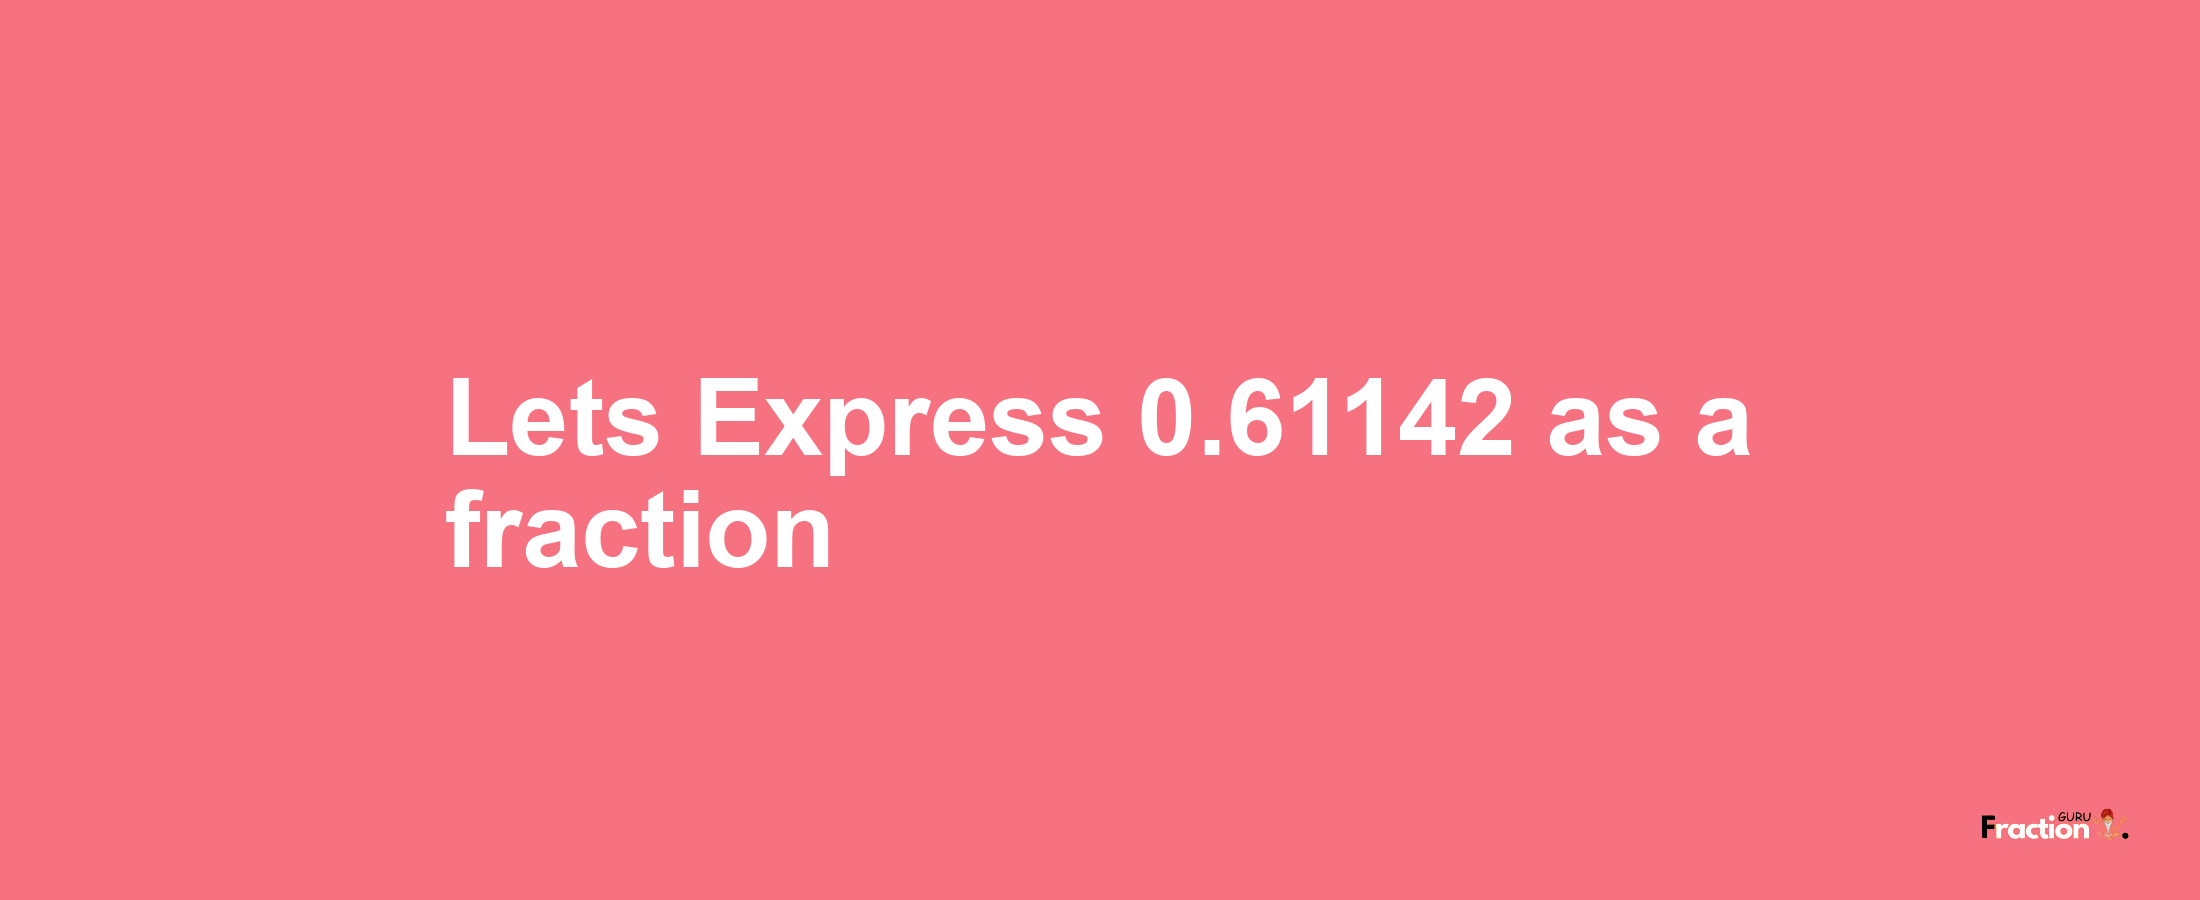 Lets Express 0.61142 as afraction